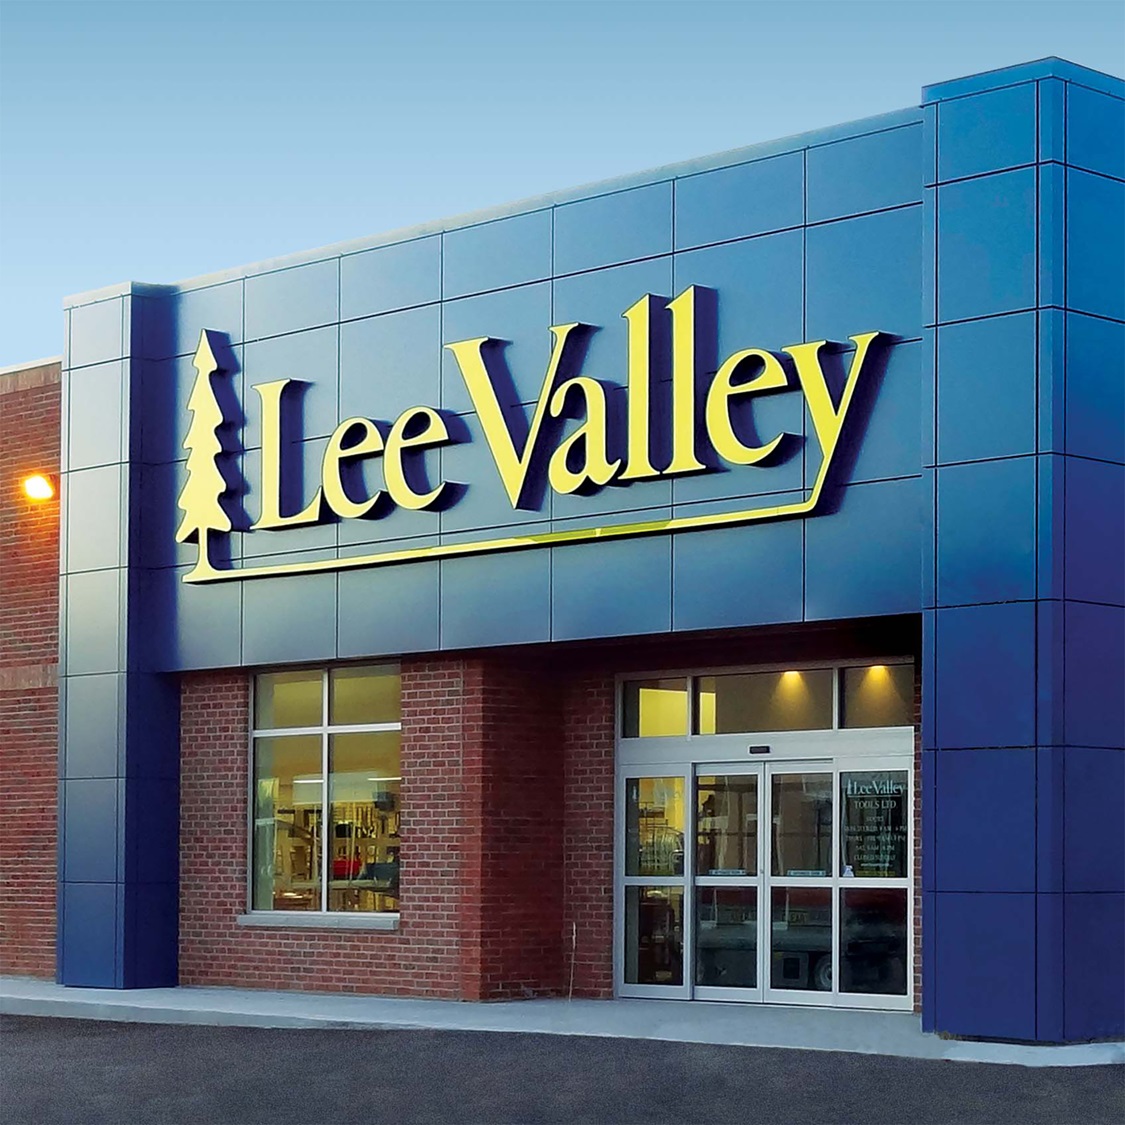 Home - Lee Valley Tools